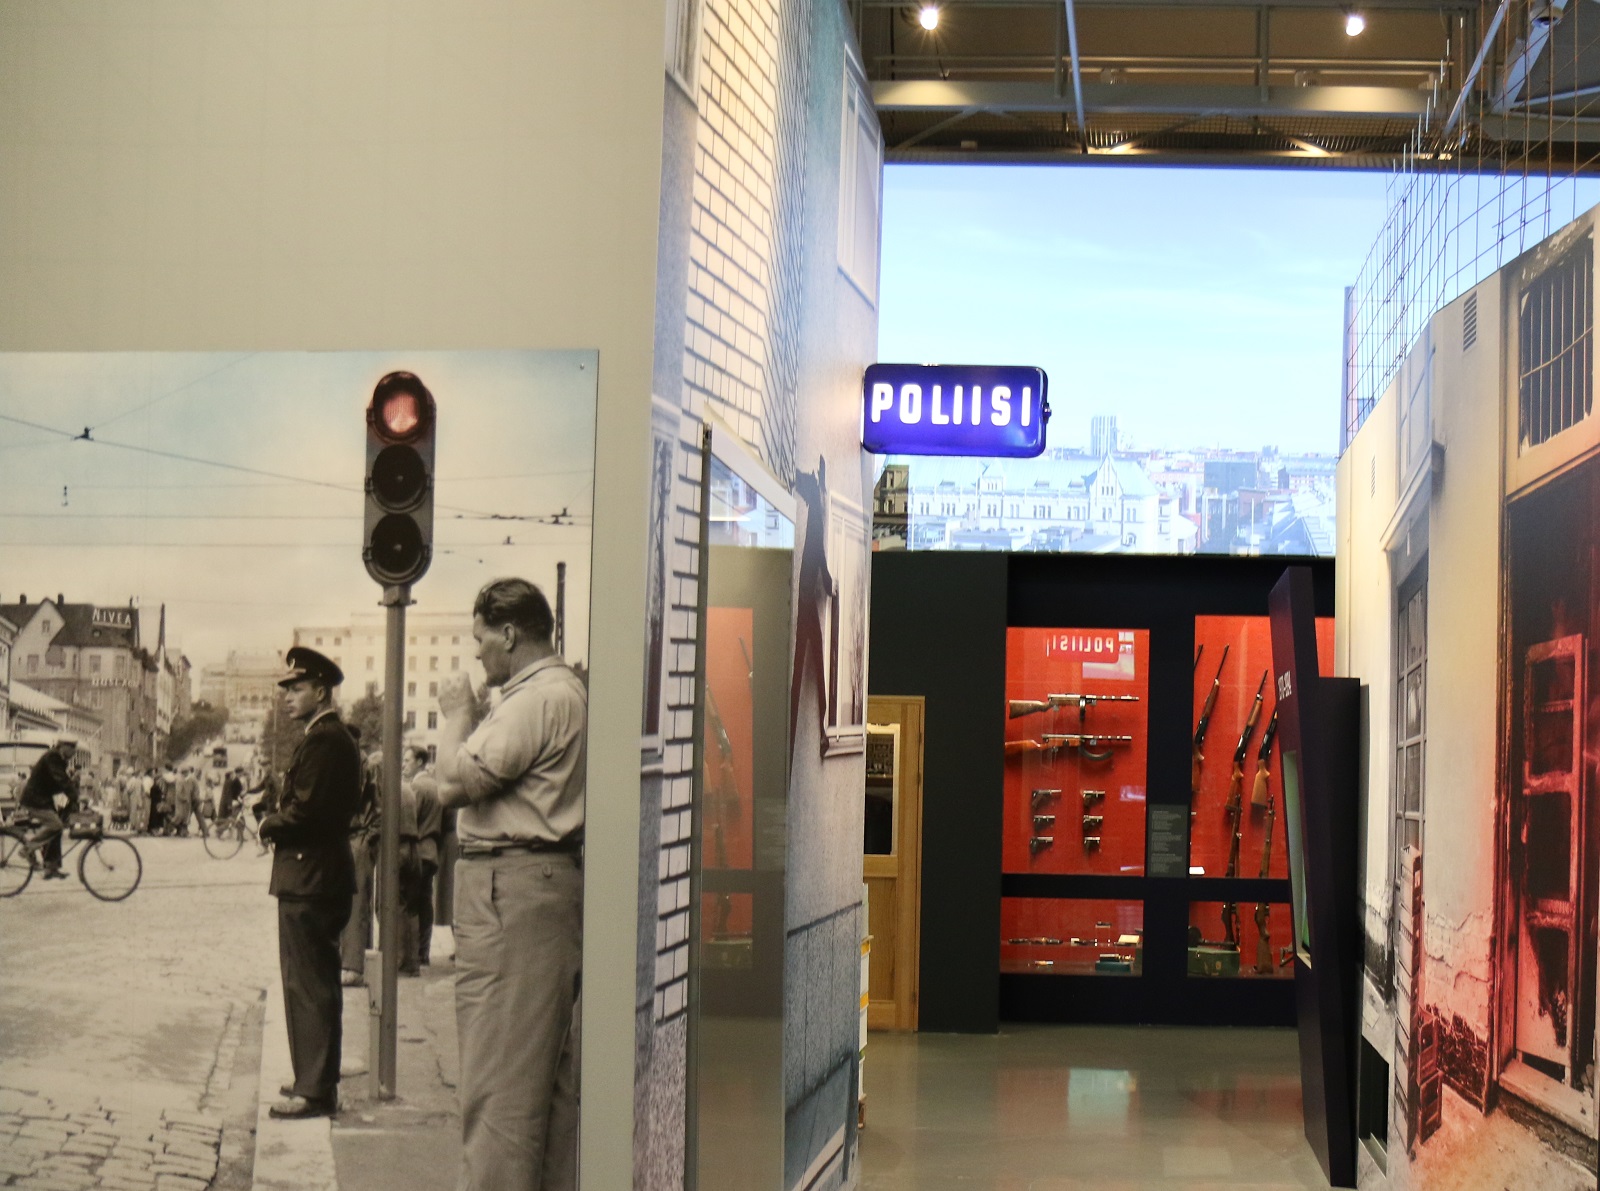 General view of the Police Museum’s exhibition. The picture shows for example the ‘Poliisi’ (the police) sign and a cityscape. Photo The Police Museum, Jarkko Järvinen.